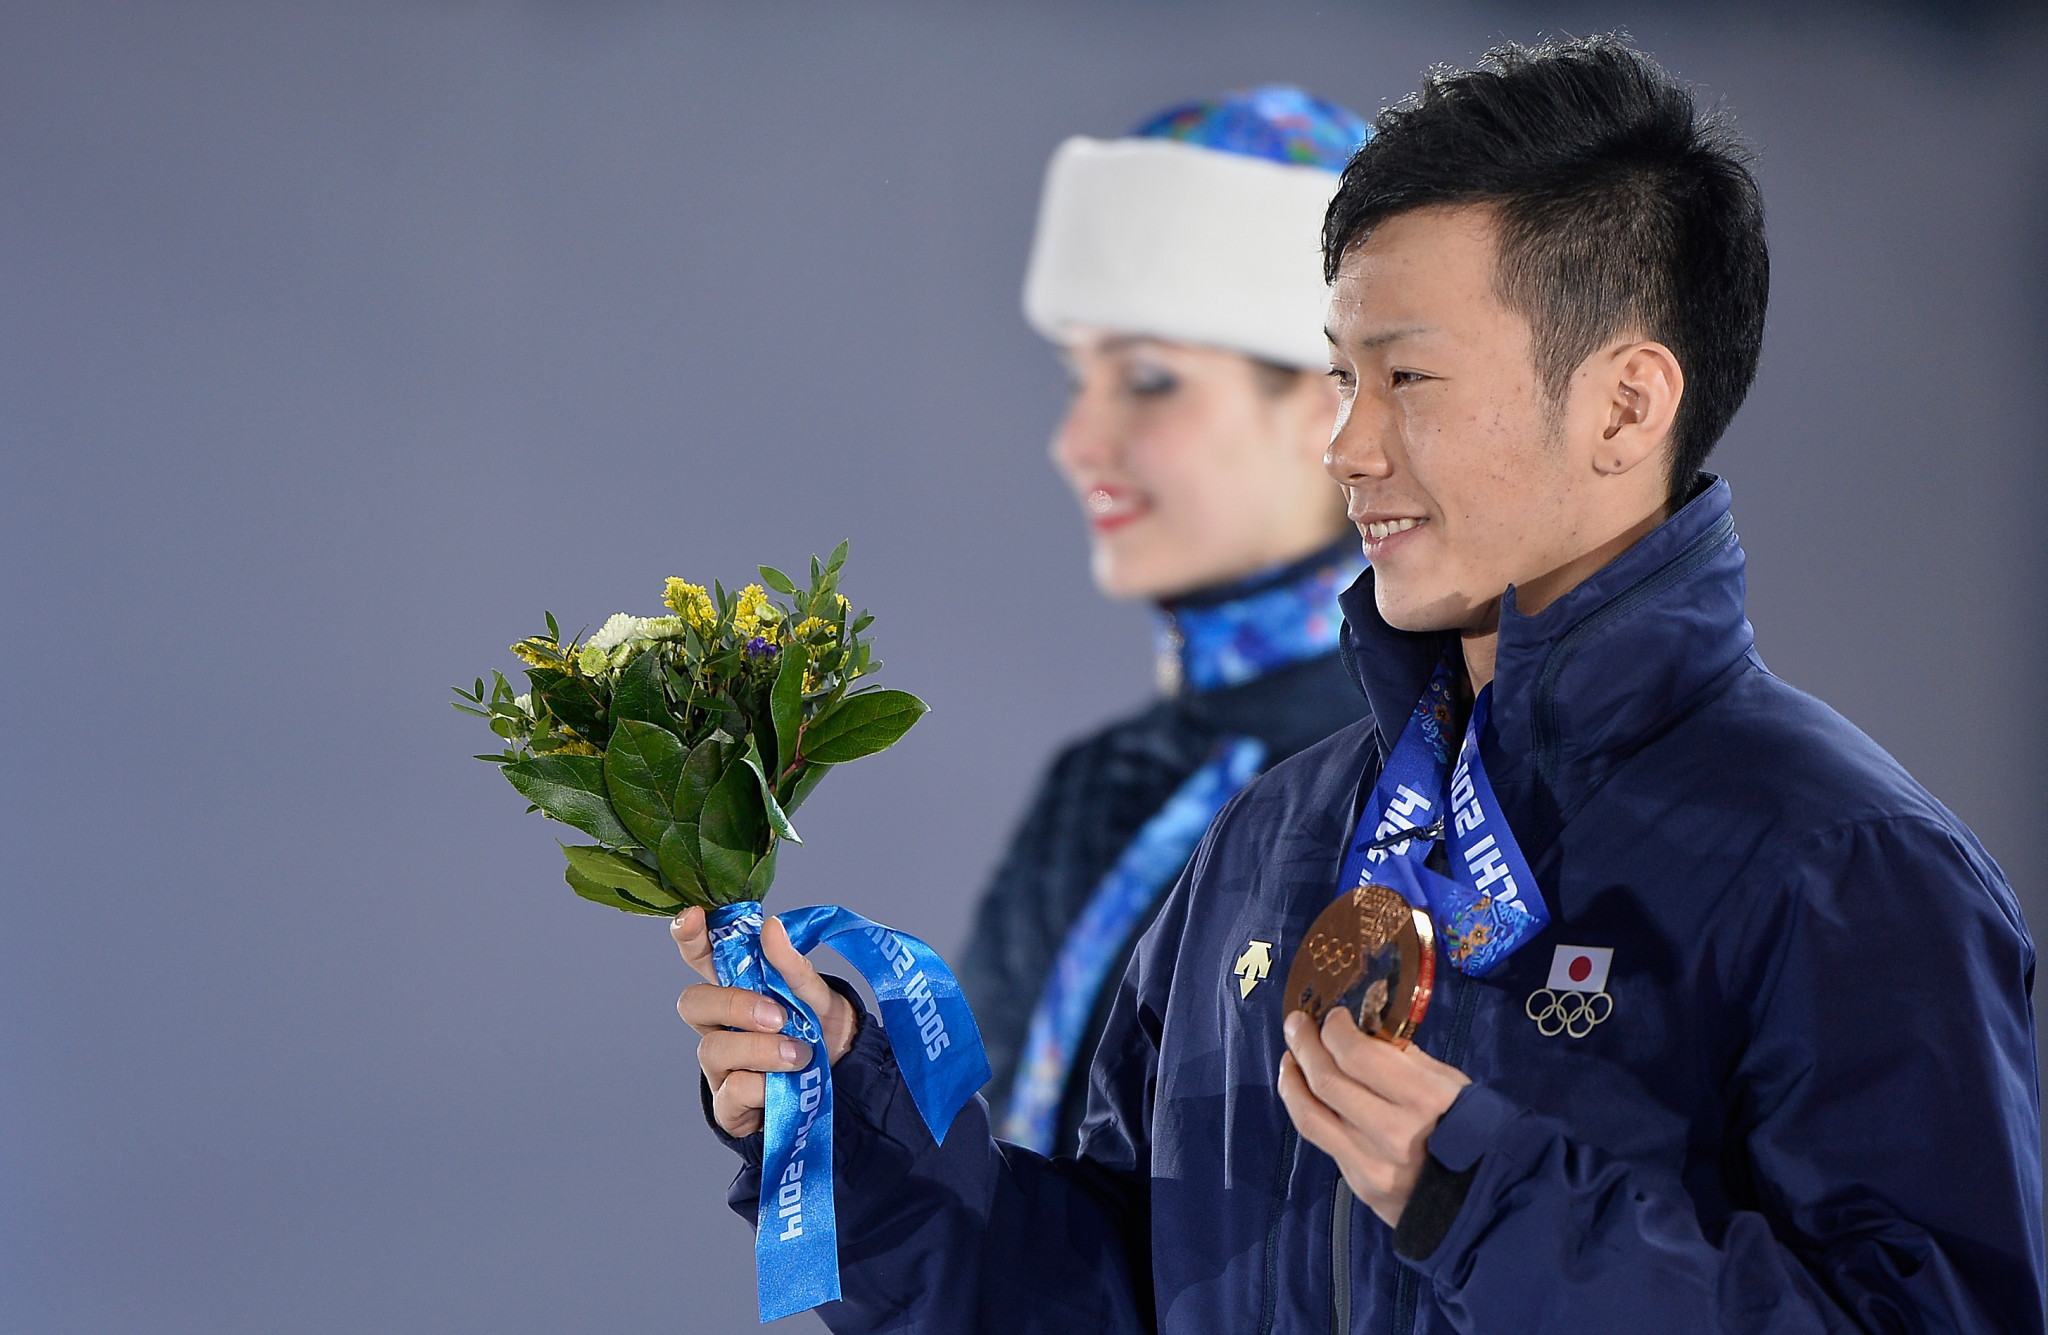 Taku Hiraoka received a bronze medal in the halfpipe at the Sochi 2014 Winter Olympic Games ©Getty Images